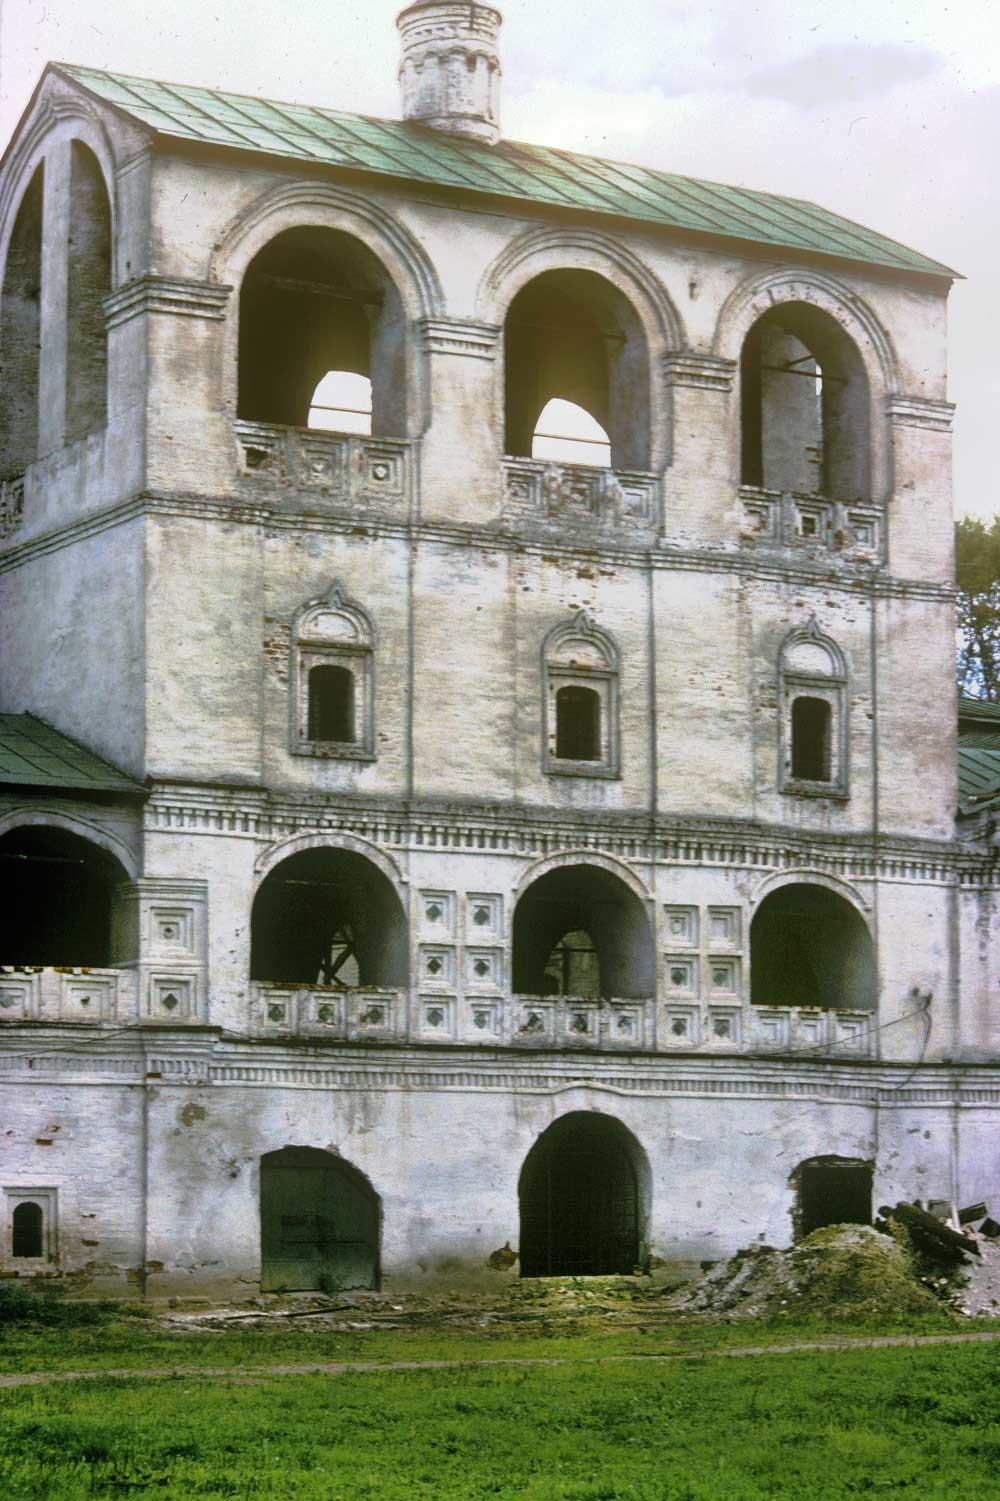 Resurrection Monastery. Belfry with Church of St. Mary of Egypt, west view. August 9, 1991.